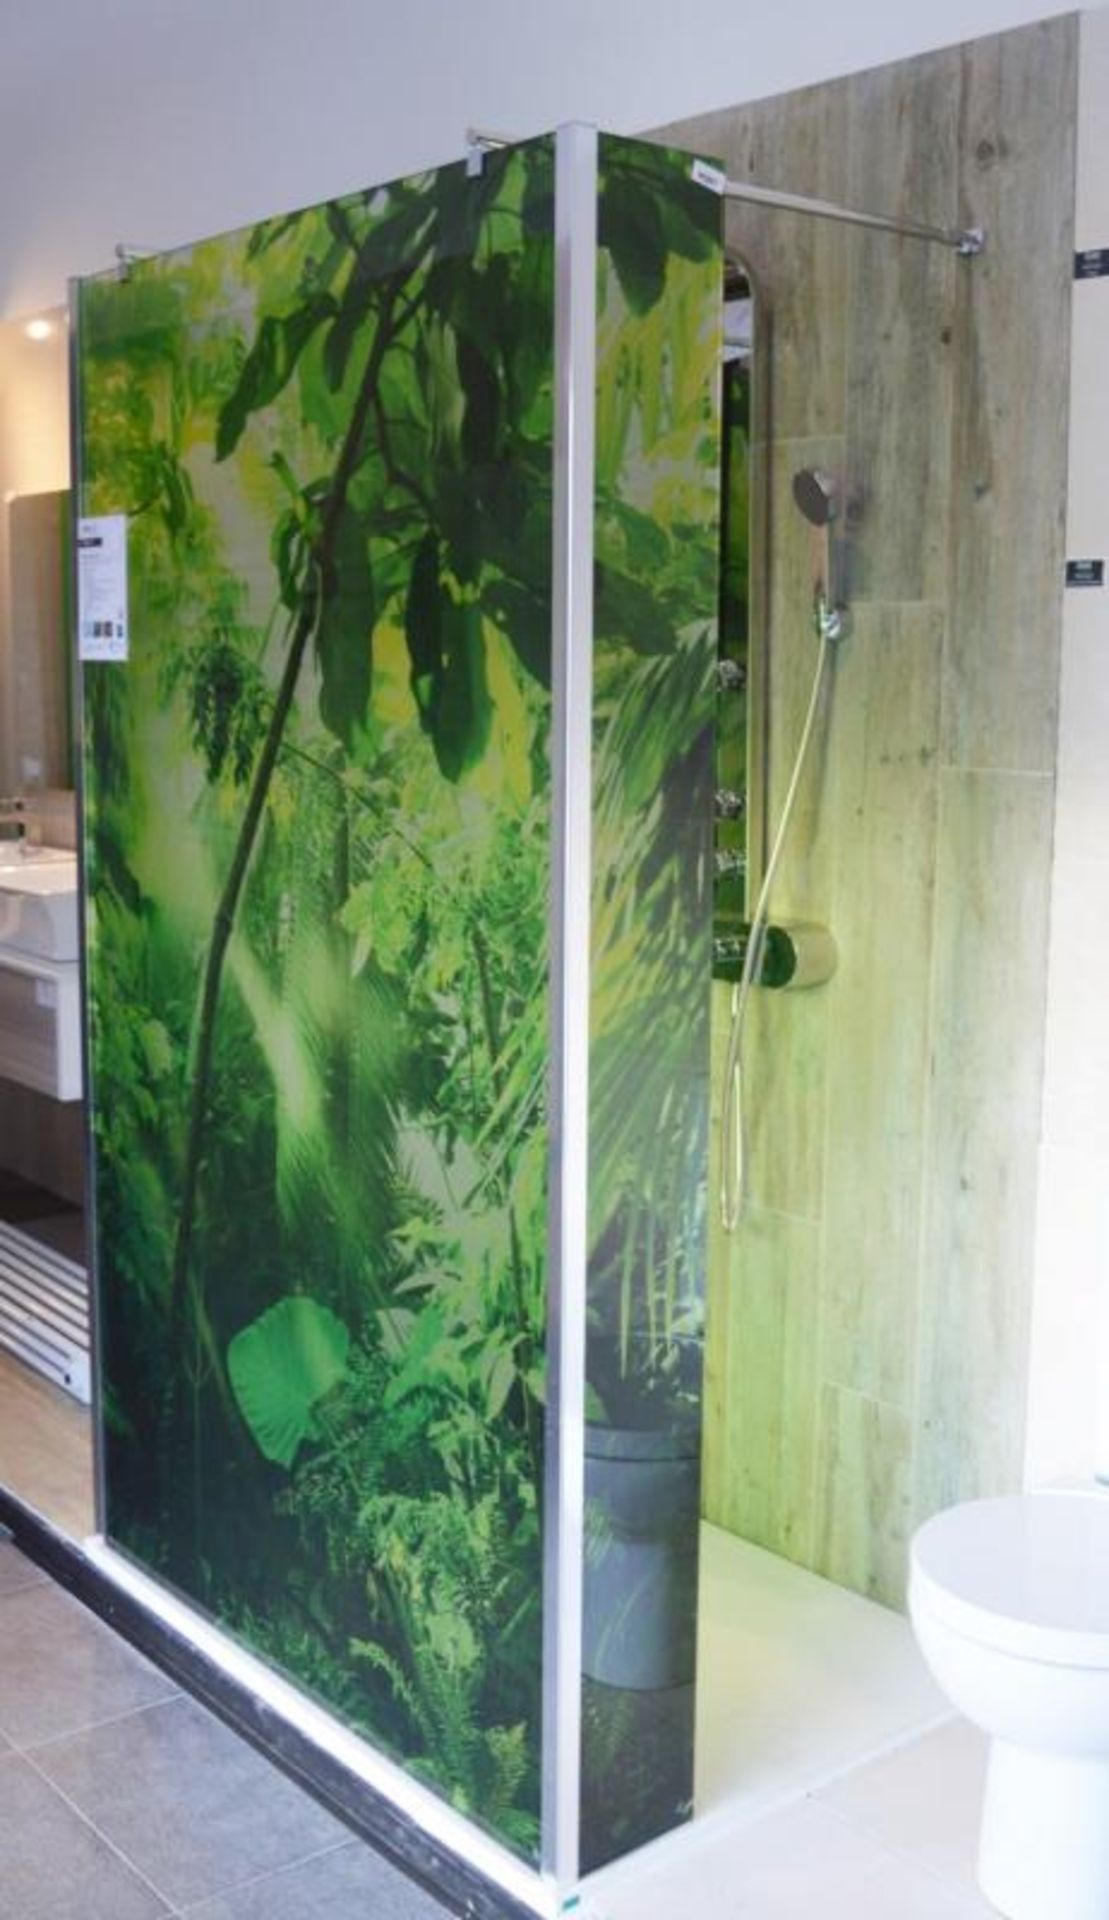 1 x Roman Showers Decam Expressions Rainforest Printed Wetroom Shower Panel With Left and Right Retu